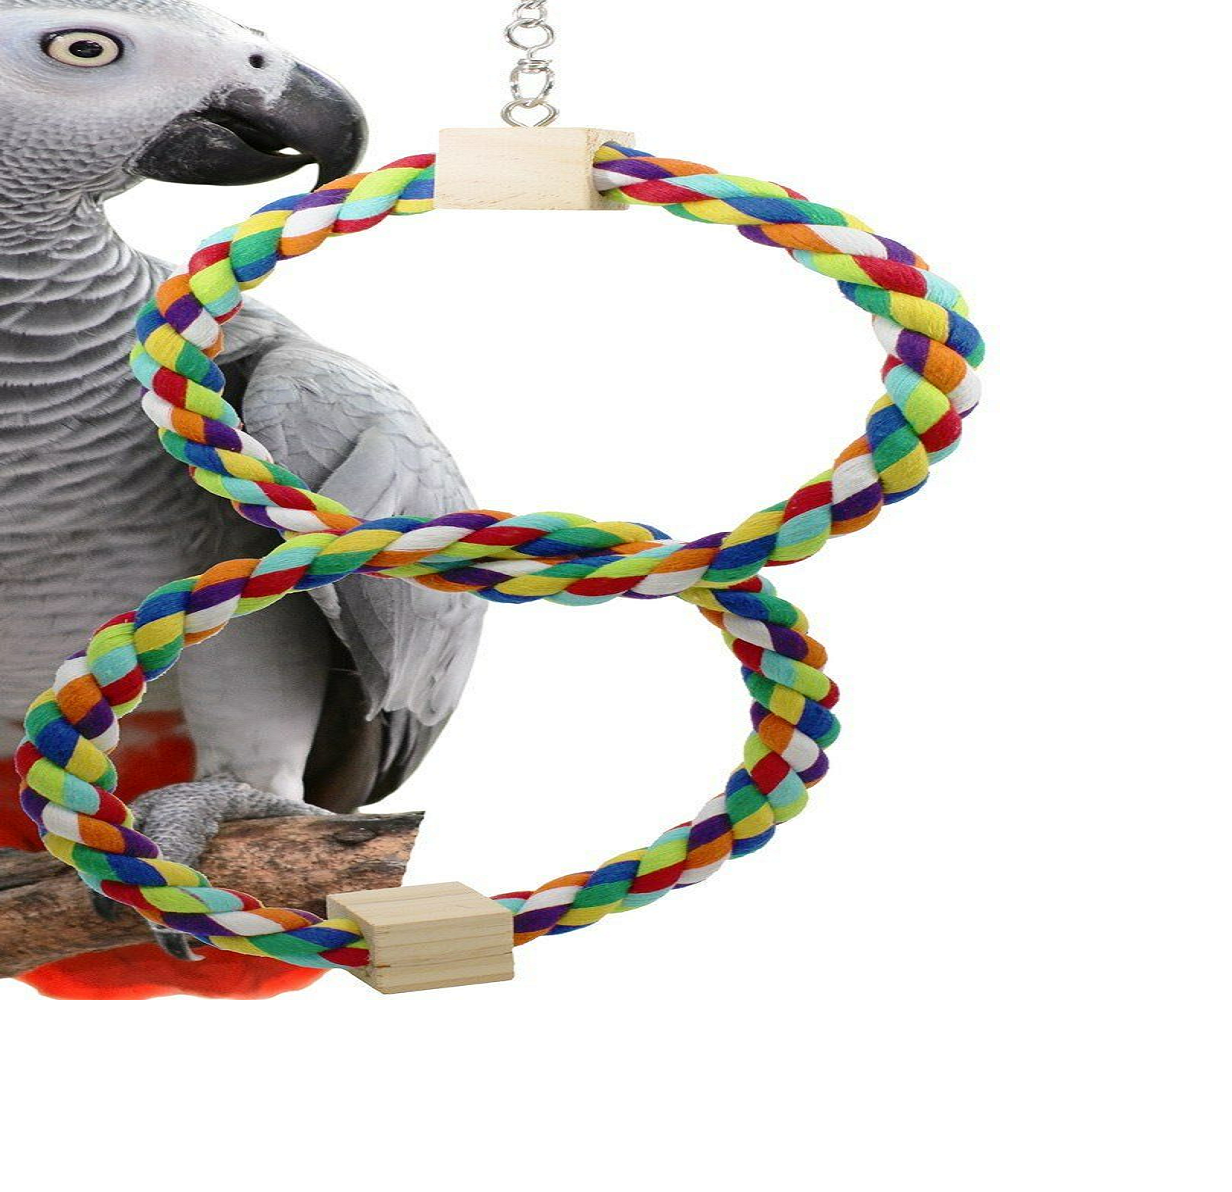 Twin Rainbow Rope Swing Bird Toy parrot cage toys cages 1677 - Walmart ...